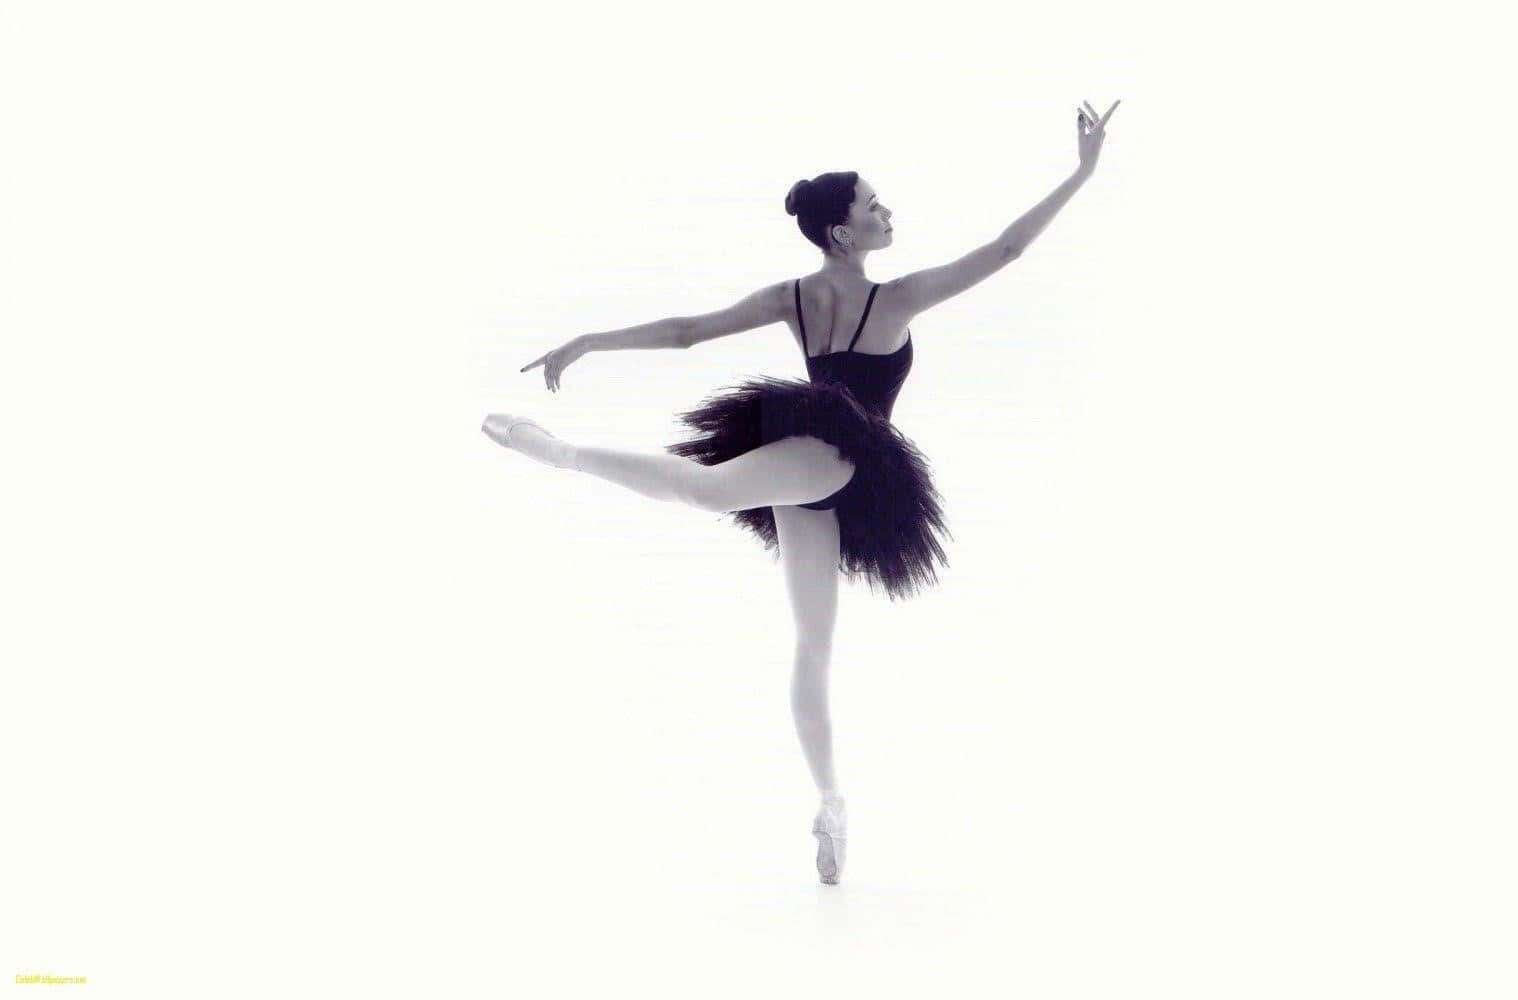 A Black And White Photo Of A Ballerina